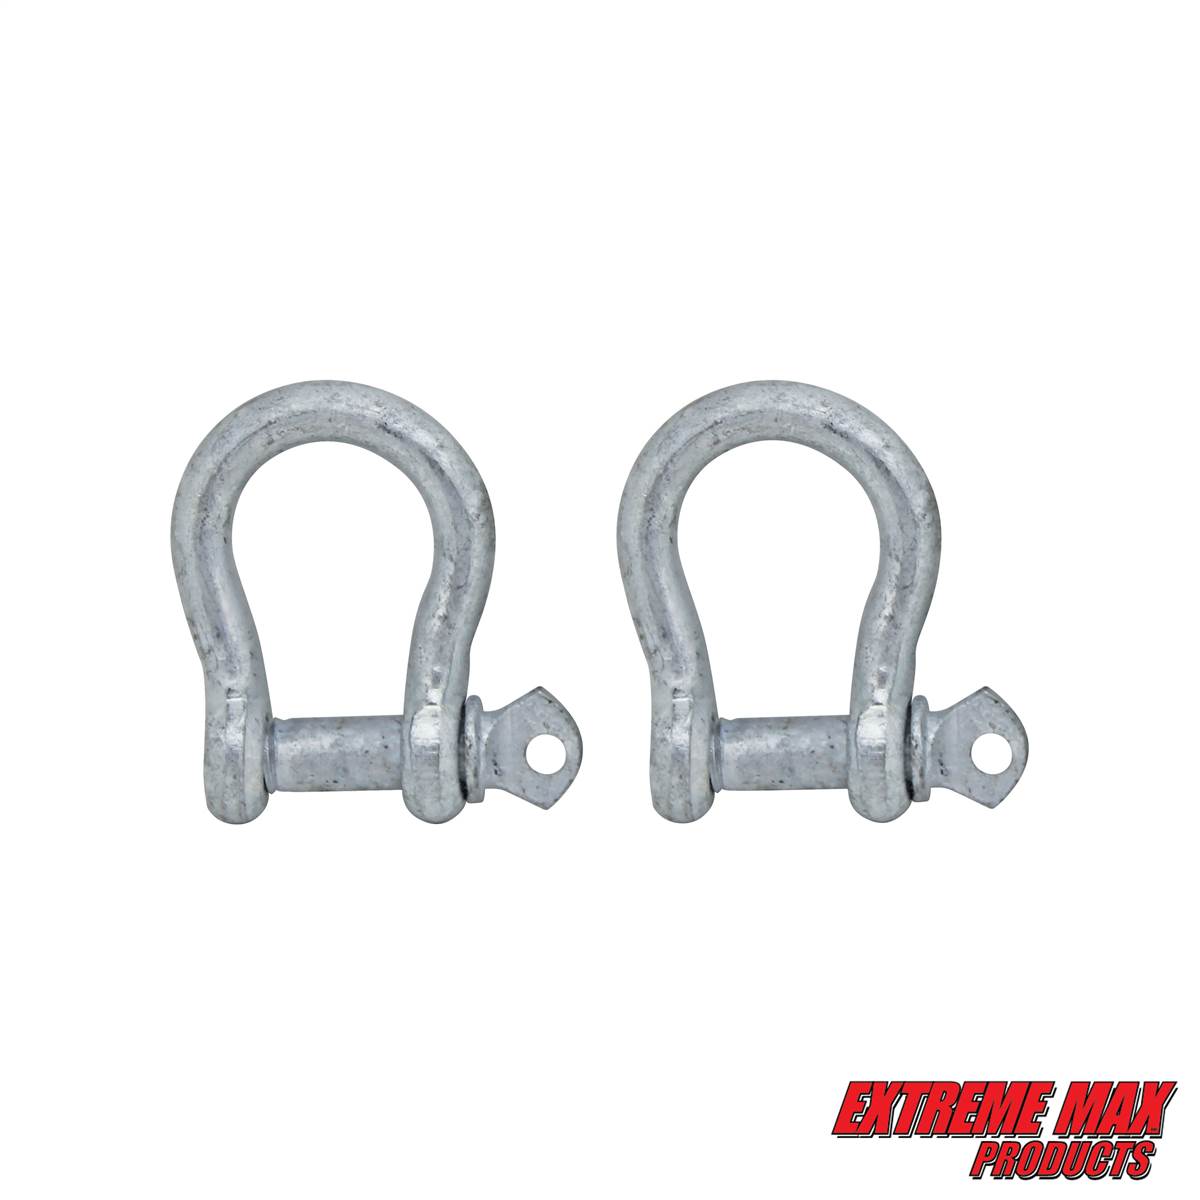 Extreme Max 3006.6605 BoatTector Galvanized Anchor Shackle 5/16 